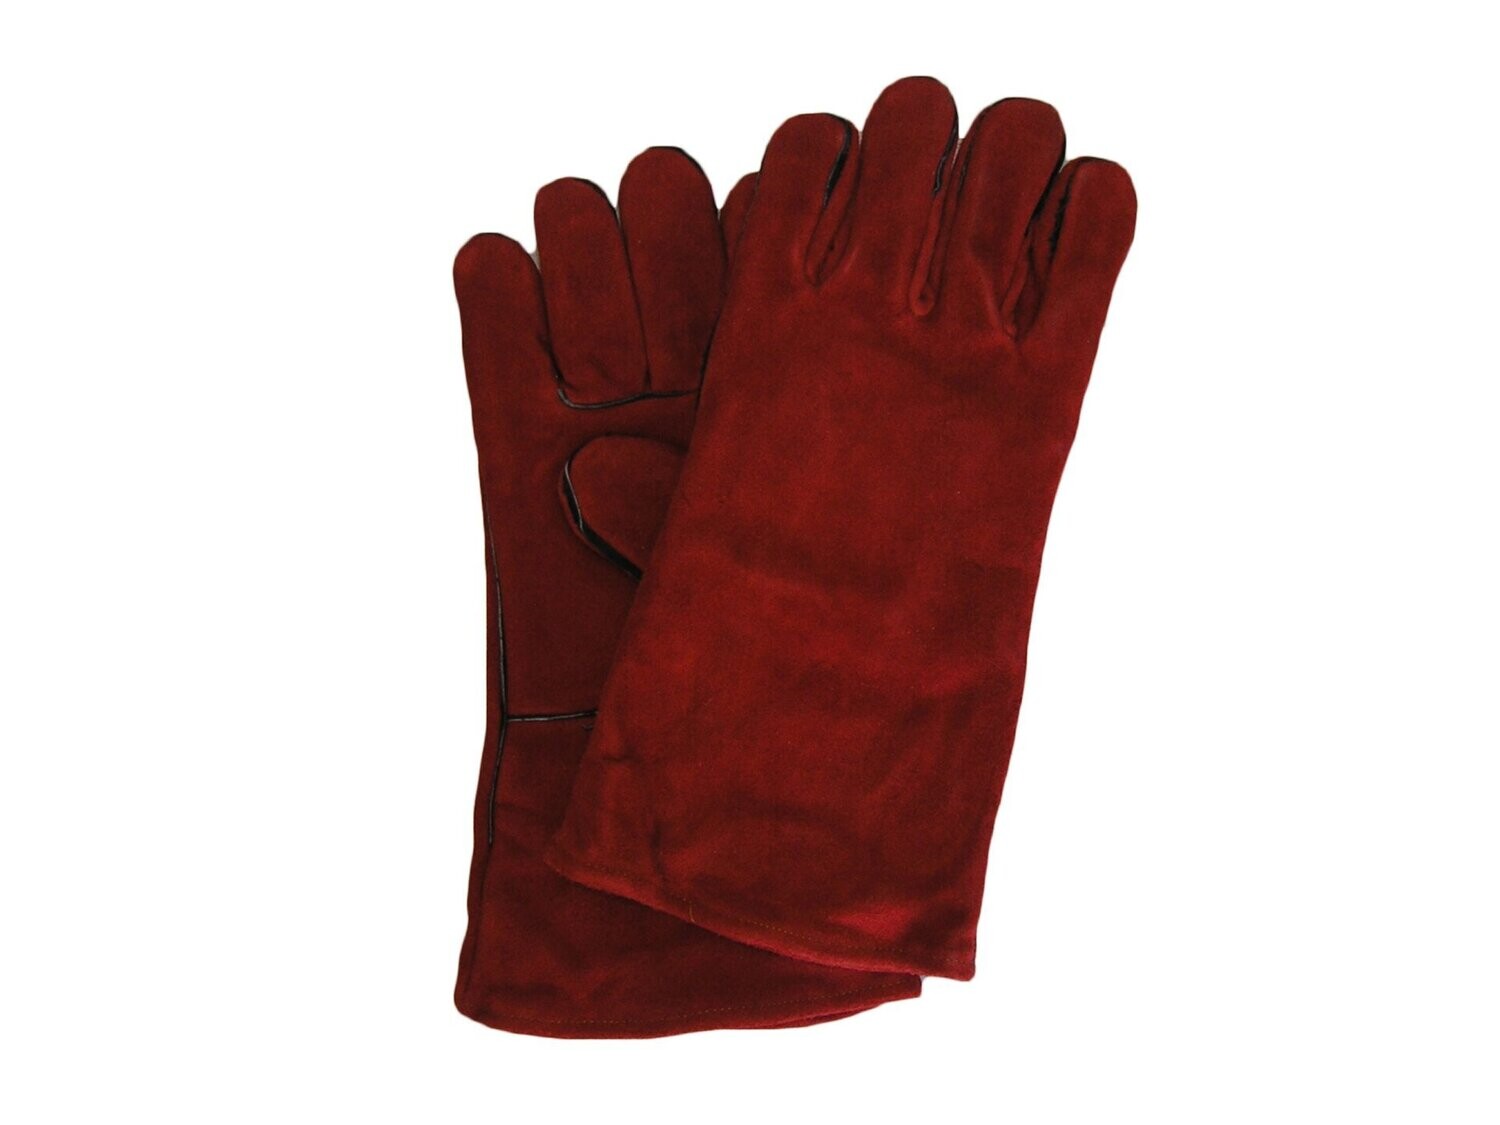 Russet Color Leather Welders Gloves , Sold By The Dozen